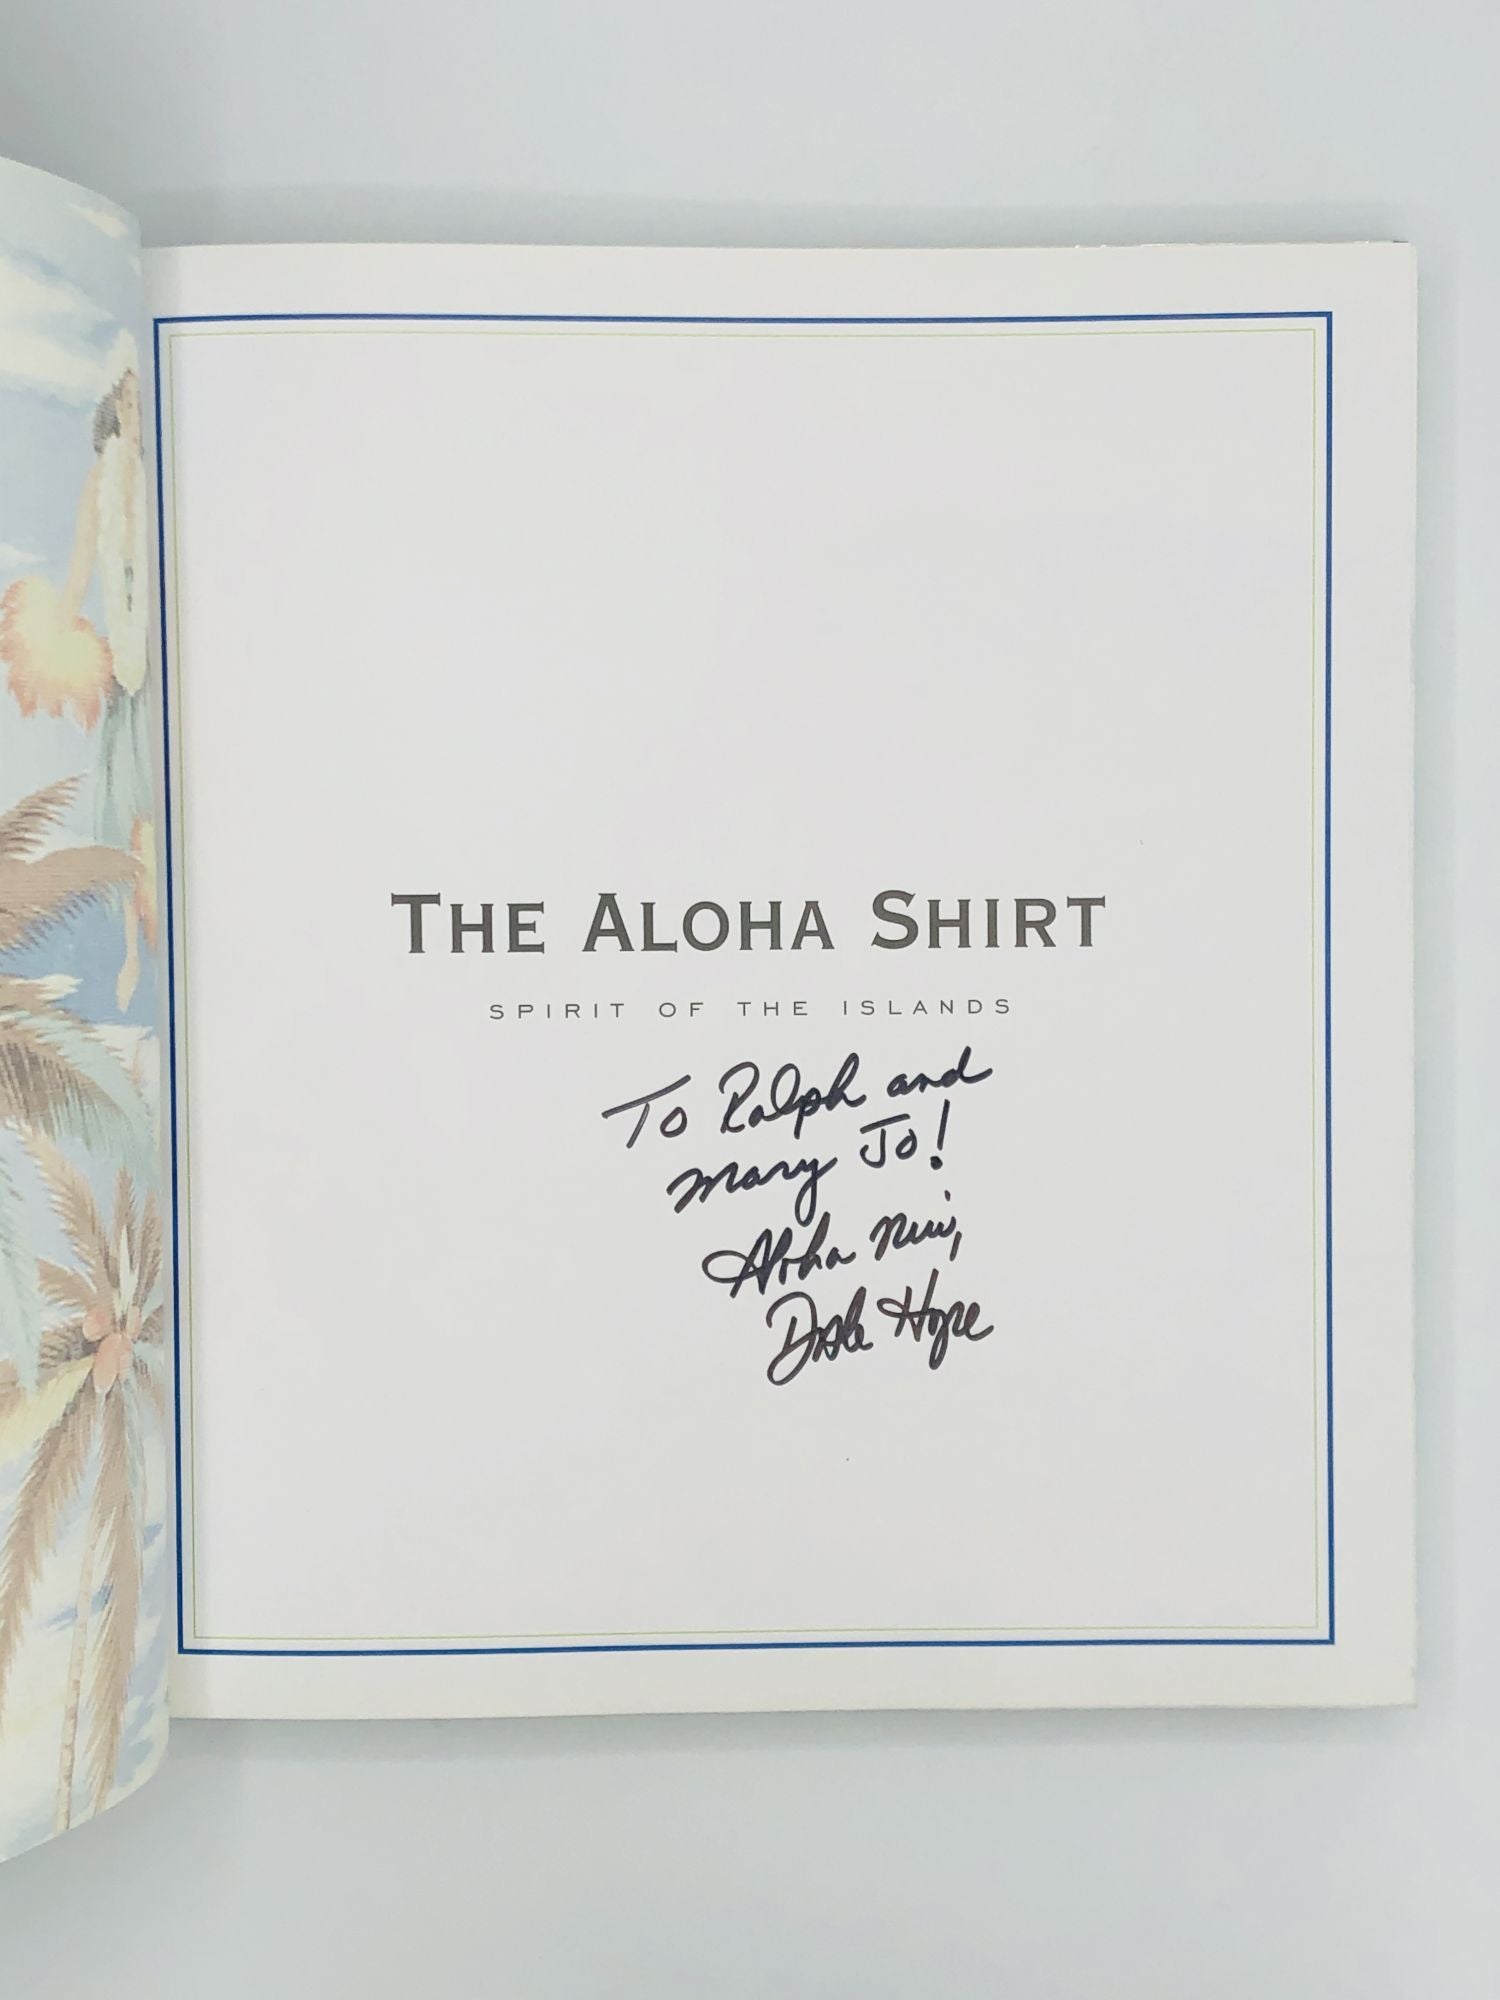 THE ALOHA SHIRT: Spirit of the Islands by Dale Hope, Gregory Tozian on  johnson rare books & archives